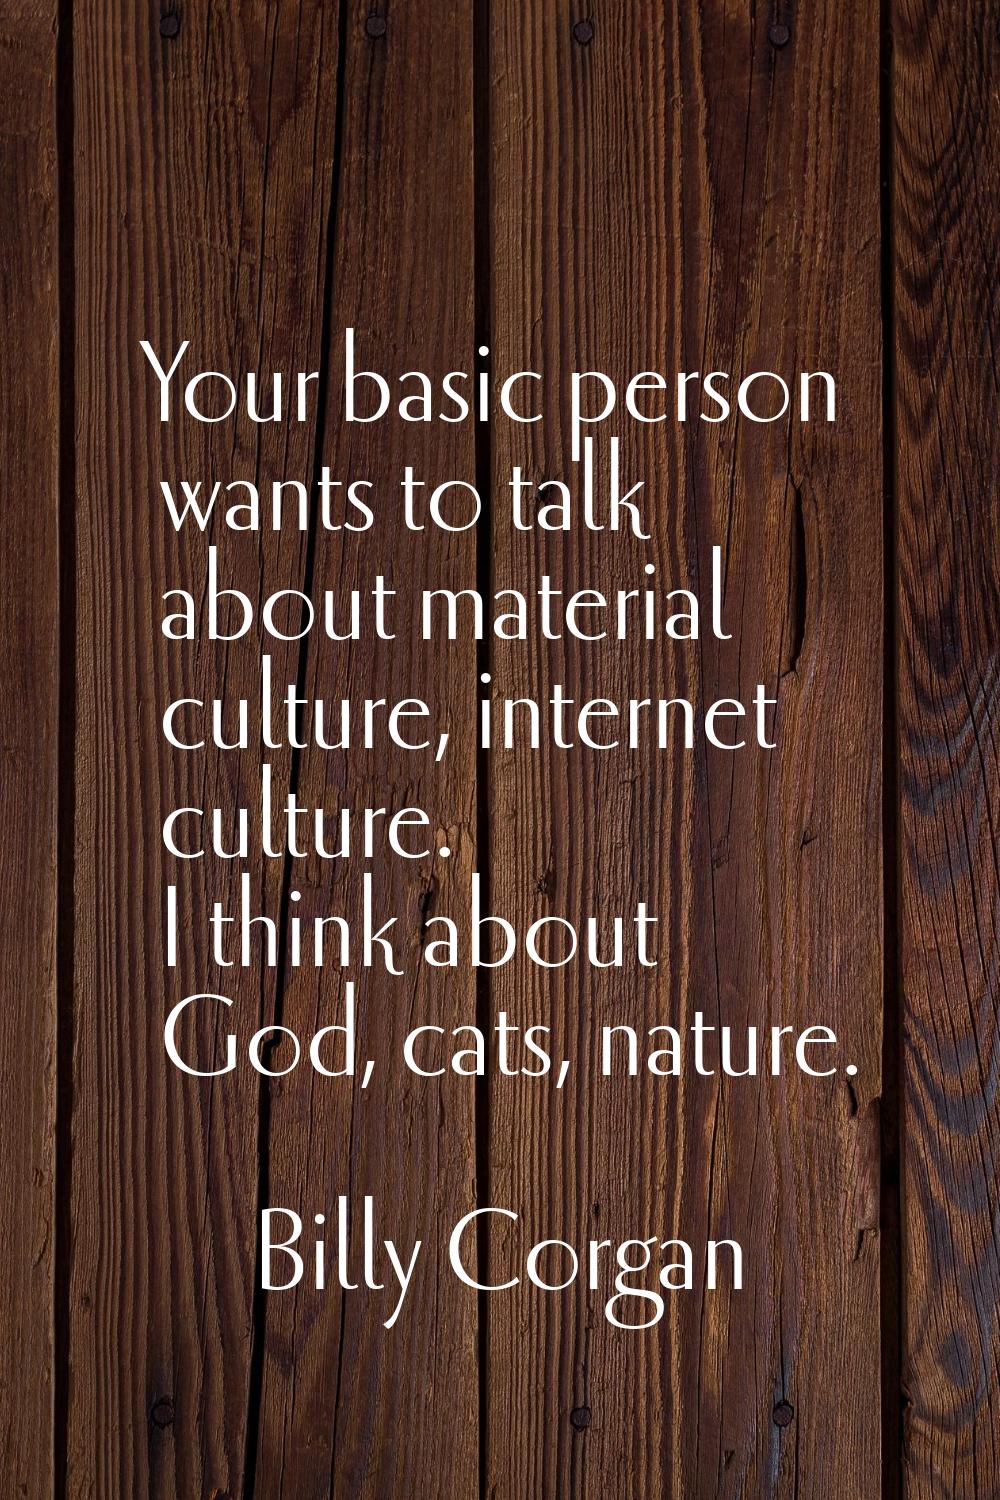 Your basic person wants to talk about material culture, internet culture. I think about God, cats, 